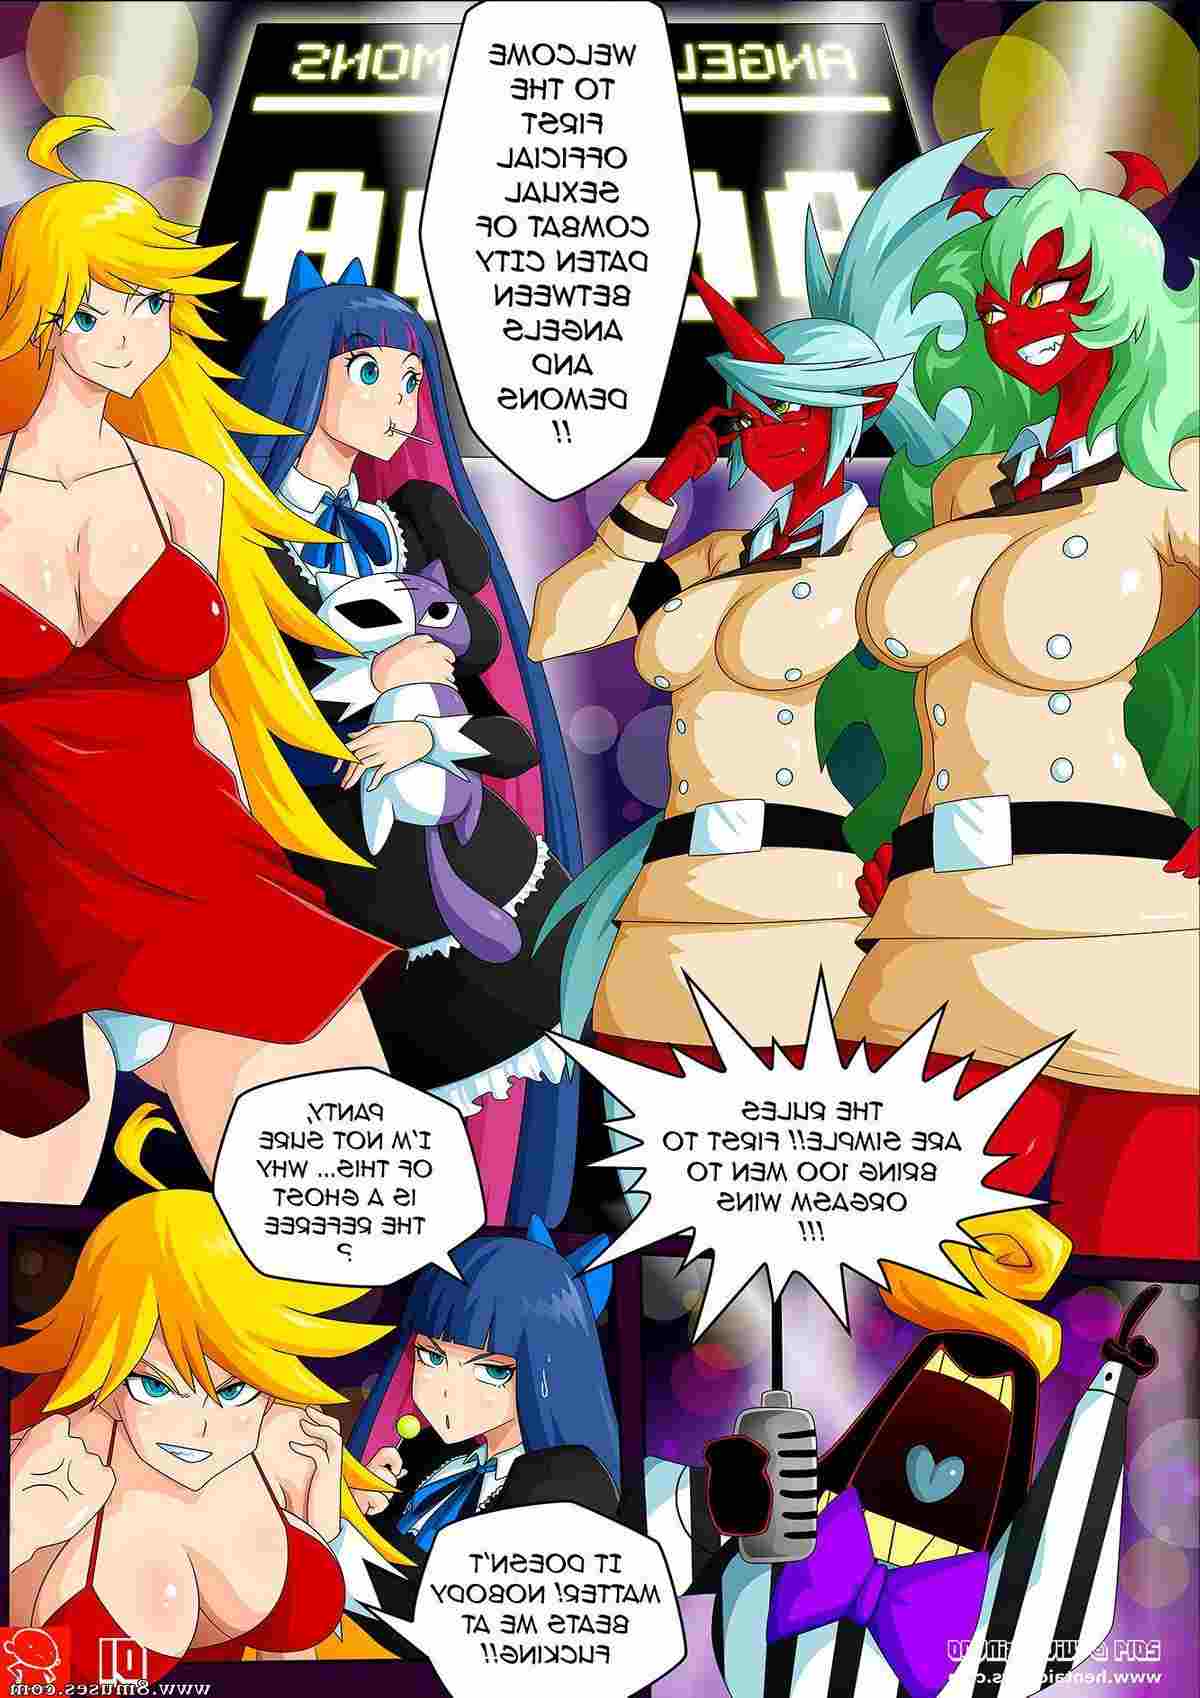 Witchking00-Comics/Panty-and-Stocking-Angels-vs-Demons Panty_and_Stocking_Angels_vs_Demons__8muses_-_Sex_and_Porn_Comics_2.jpg